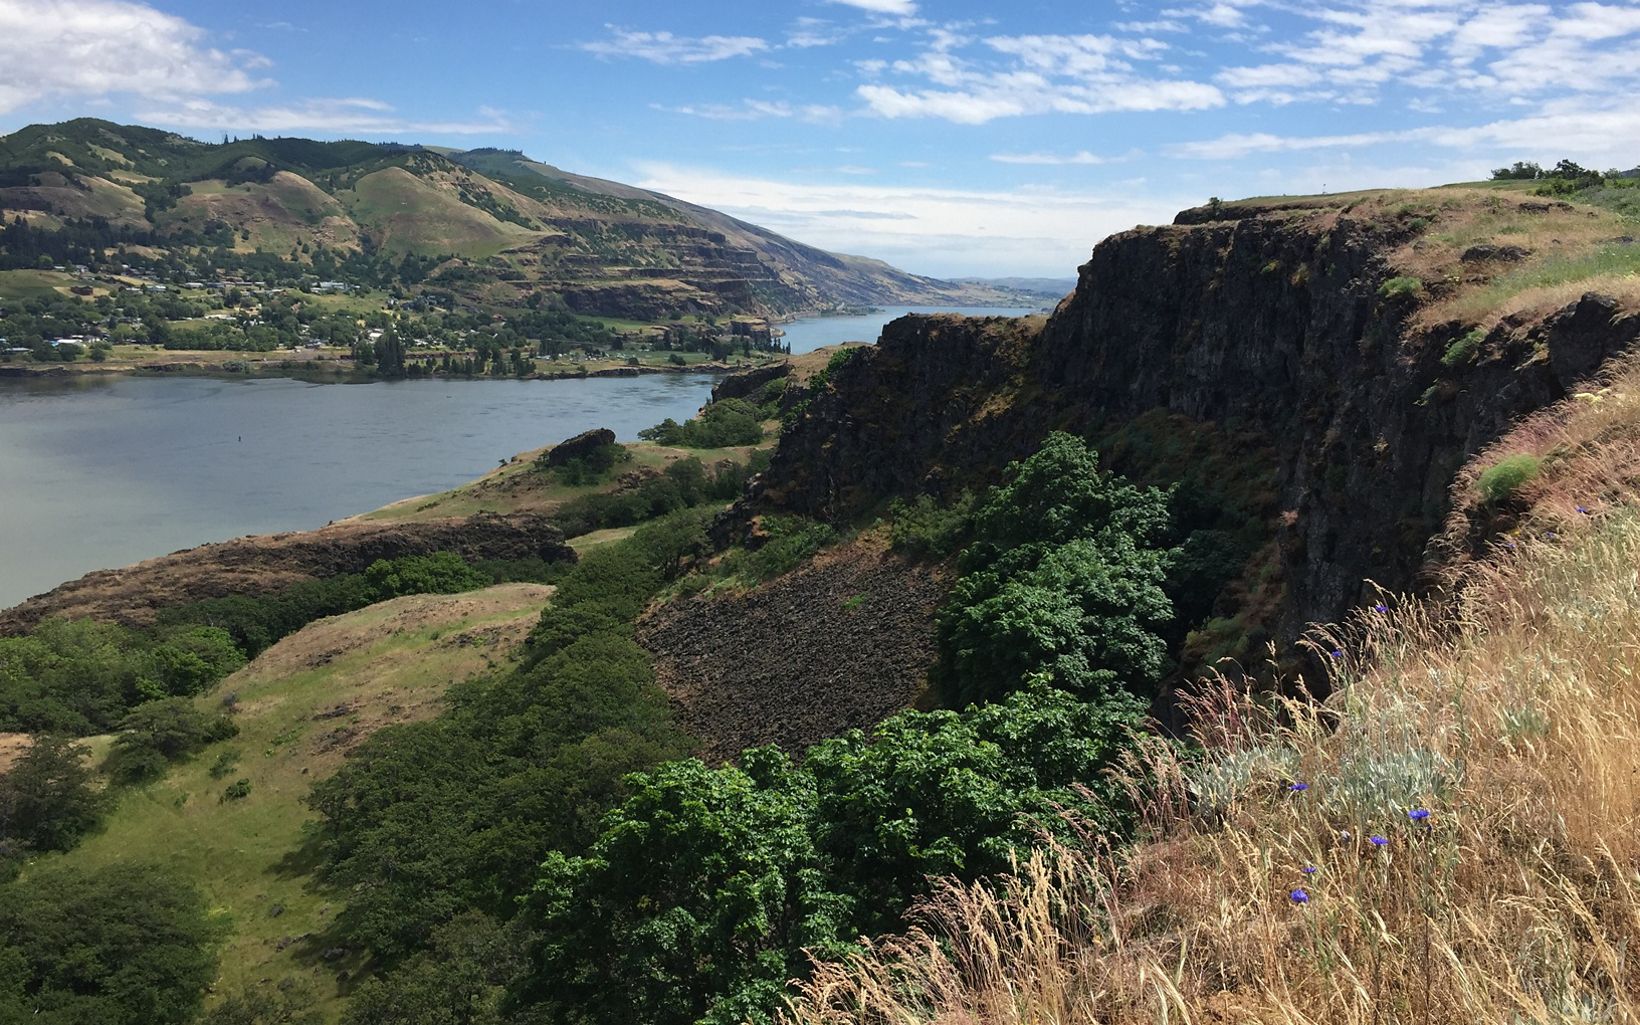 The view across the Columbia River Gorge from Tom McCall Preserve in Rowena, Oregon.